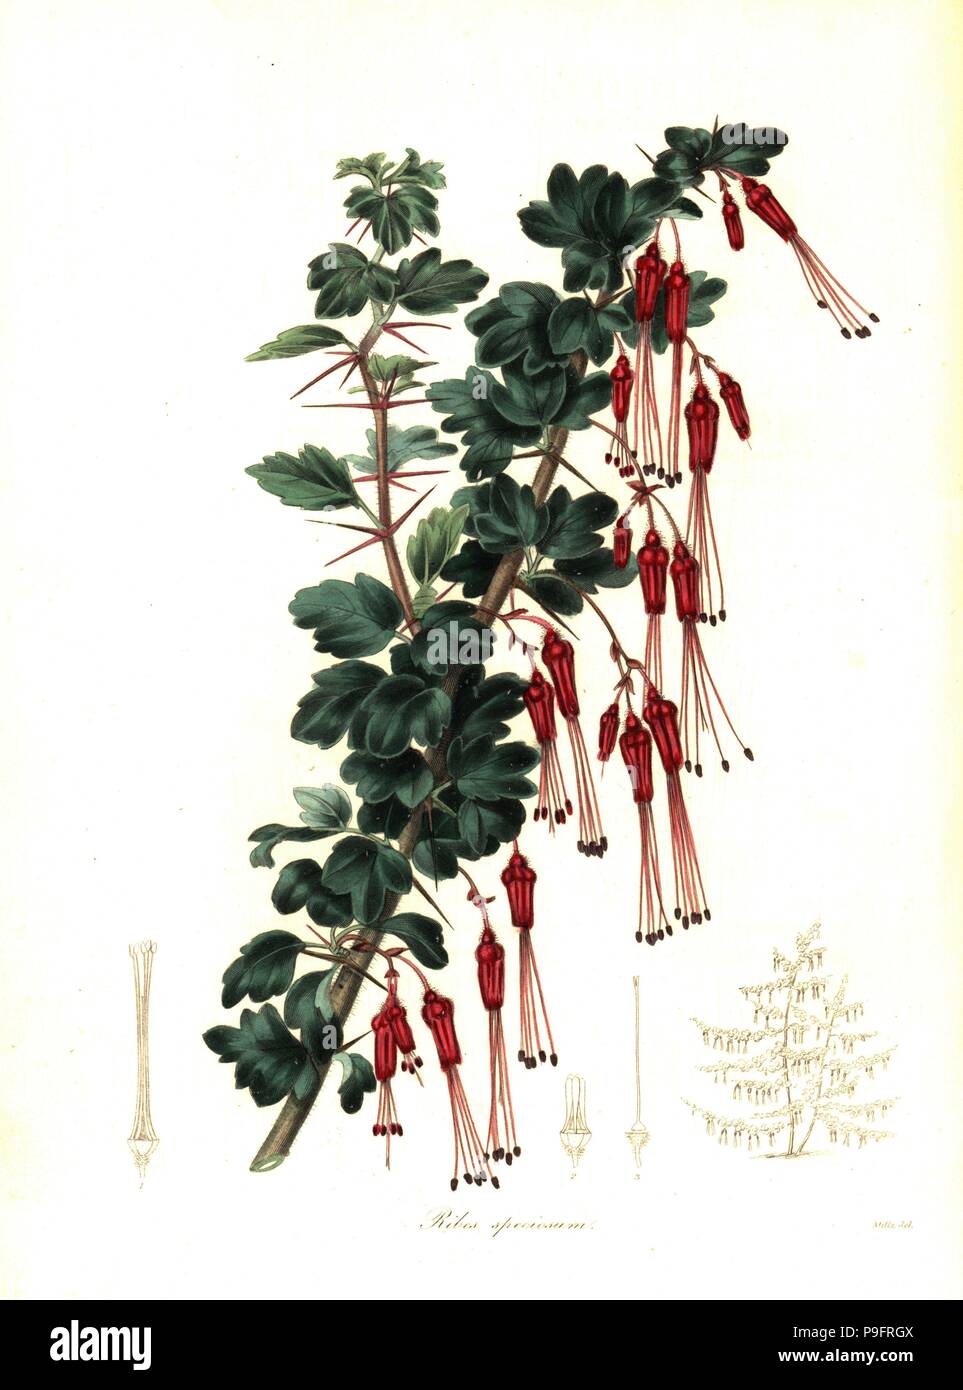 Showy gooseberry or fuchsia-flowered gooseberry, Ribes speciosum. Handcoloured copperplate engraving after a botanical illustration by Mills from Benjamin Maund and the Rev. John Stevens Henslow's The Botanist, London, 1836. Stock Photo